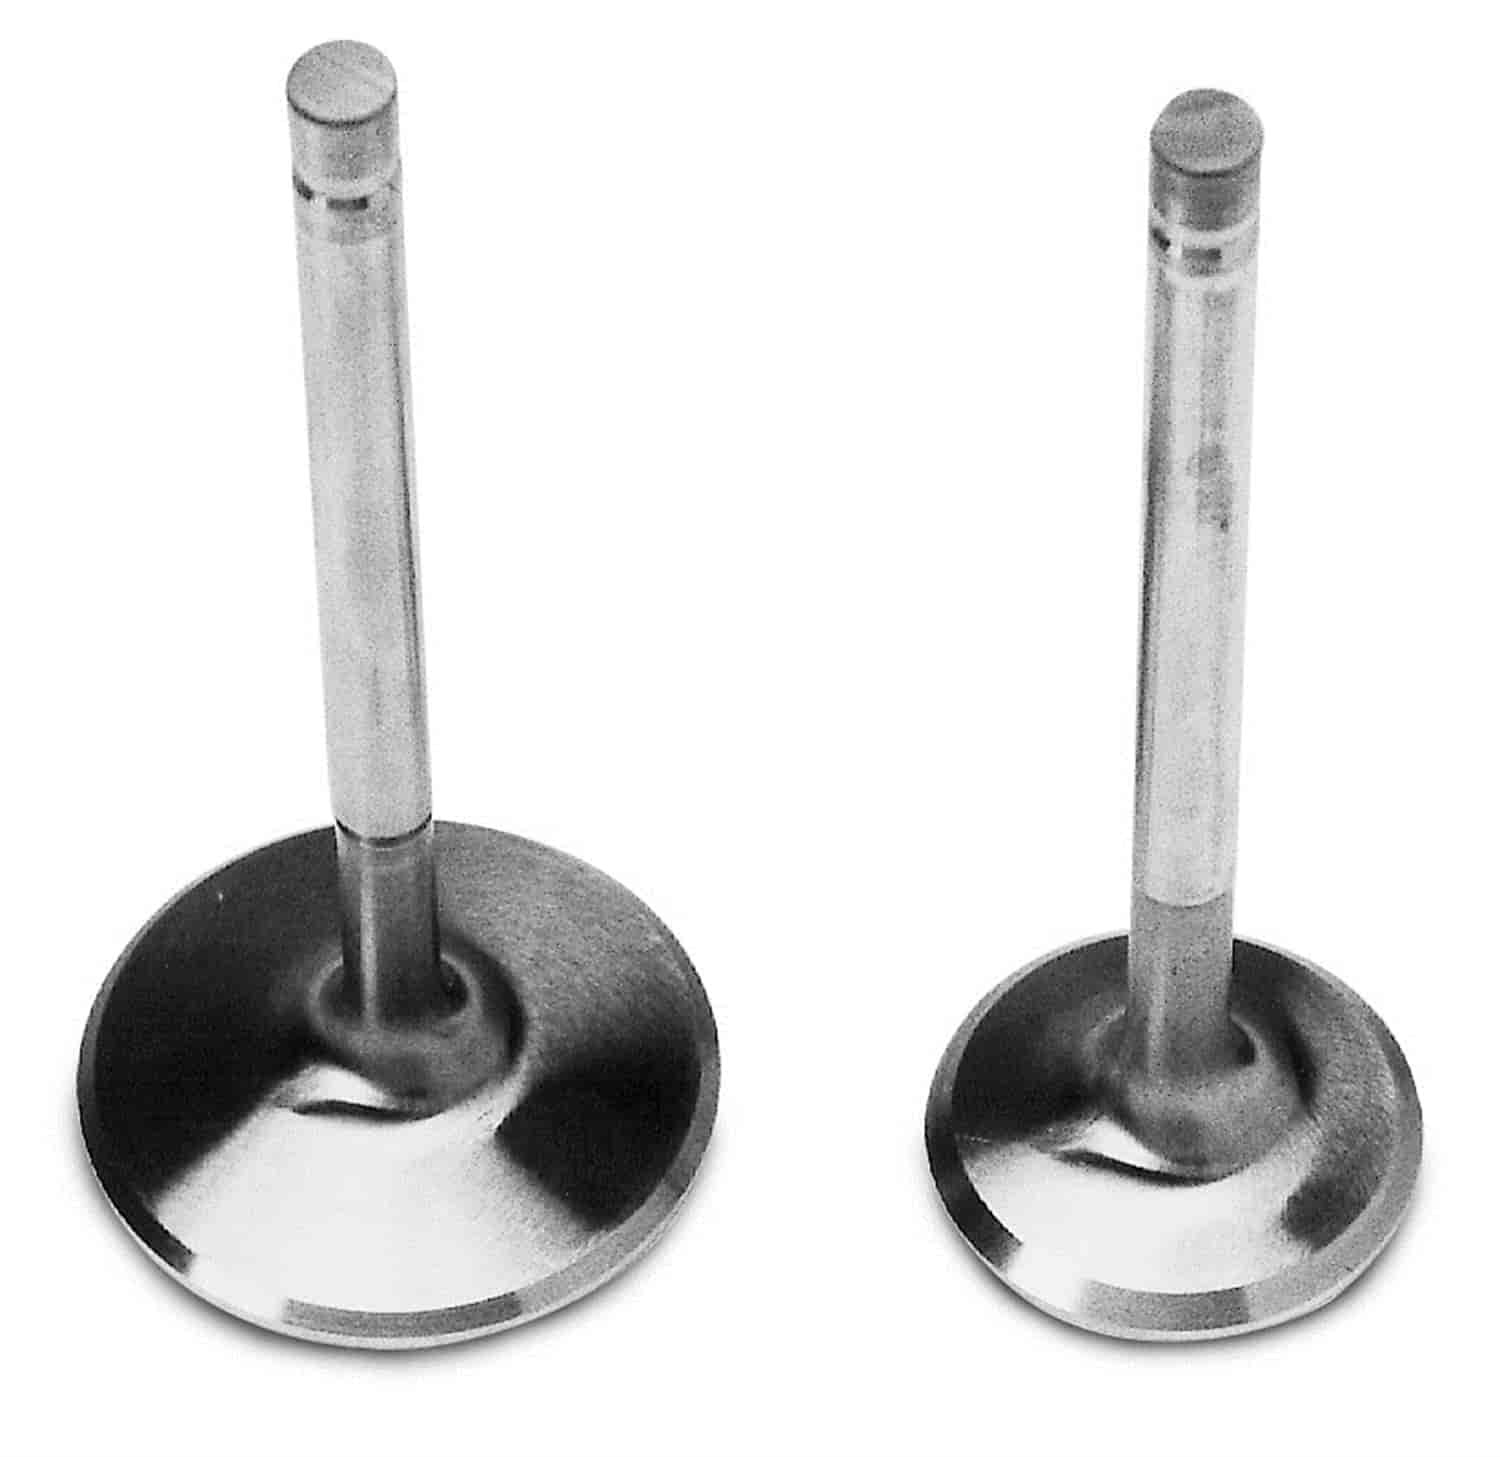 Single Exhaust Valve 1.60" for Small Block Chevy Victor Jr. Heads #350-776119, 350-77629, 350-77639, & 350-77649